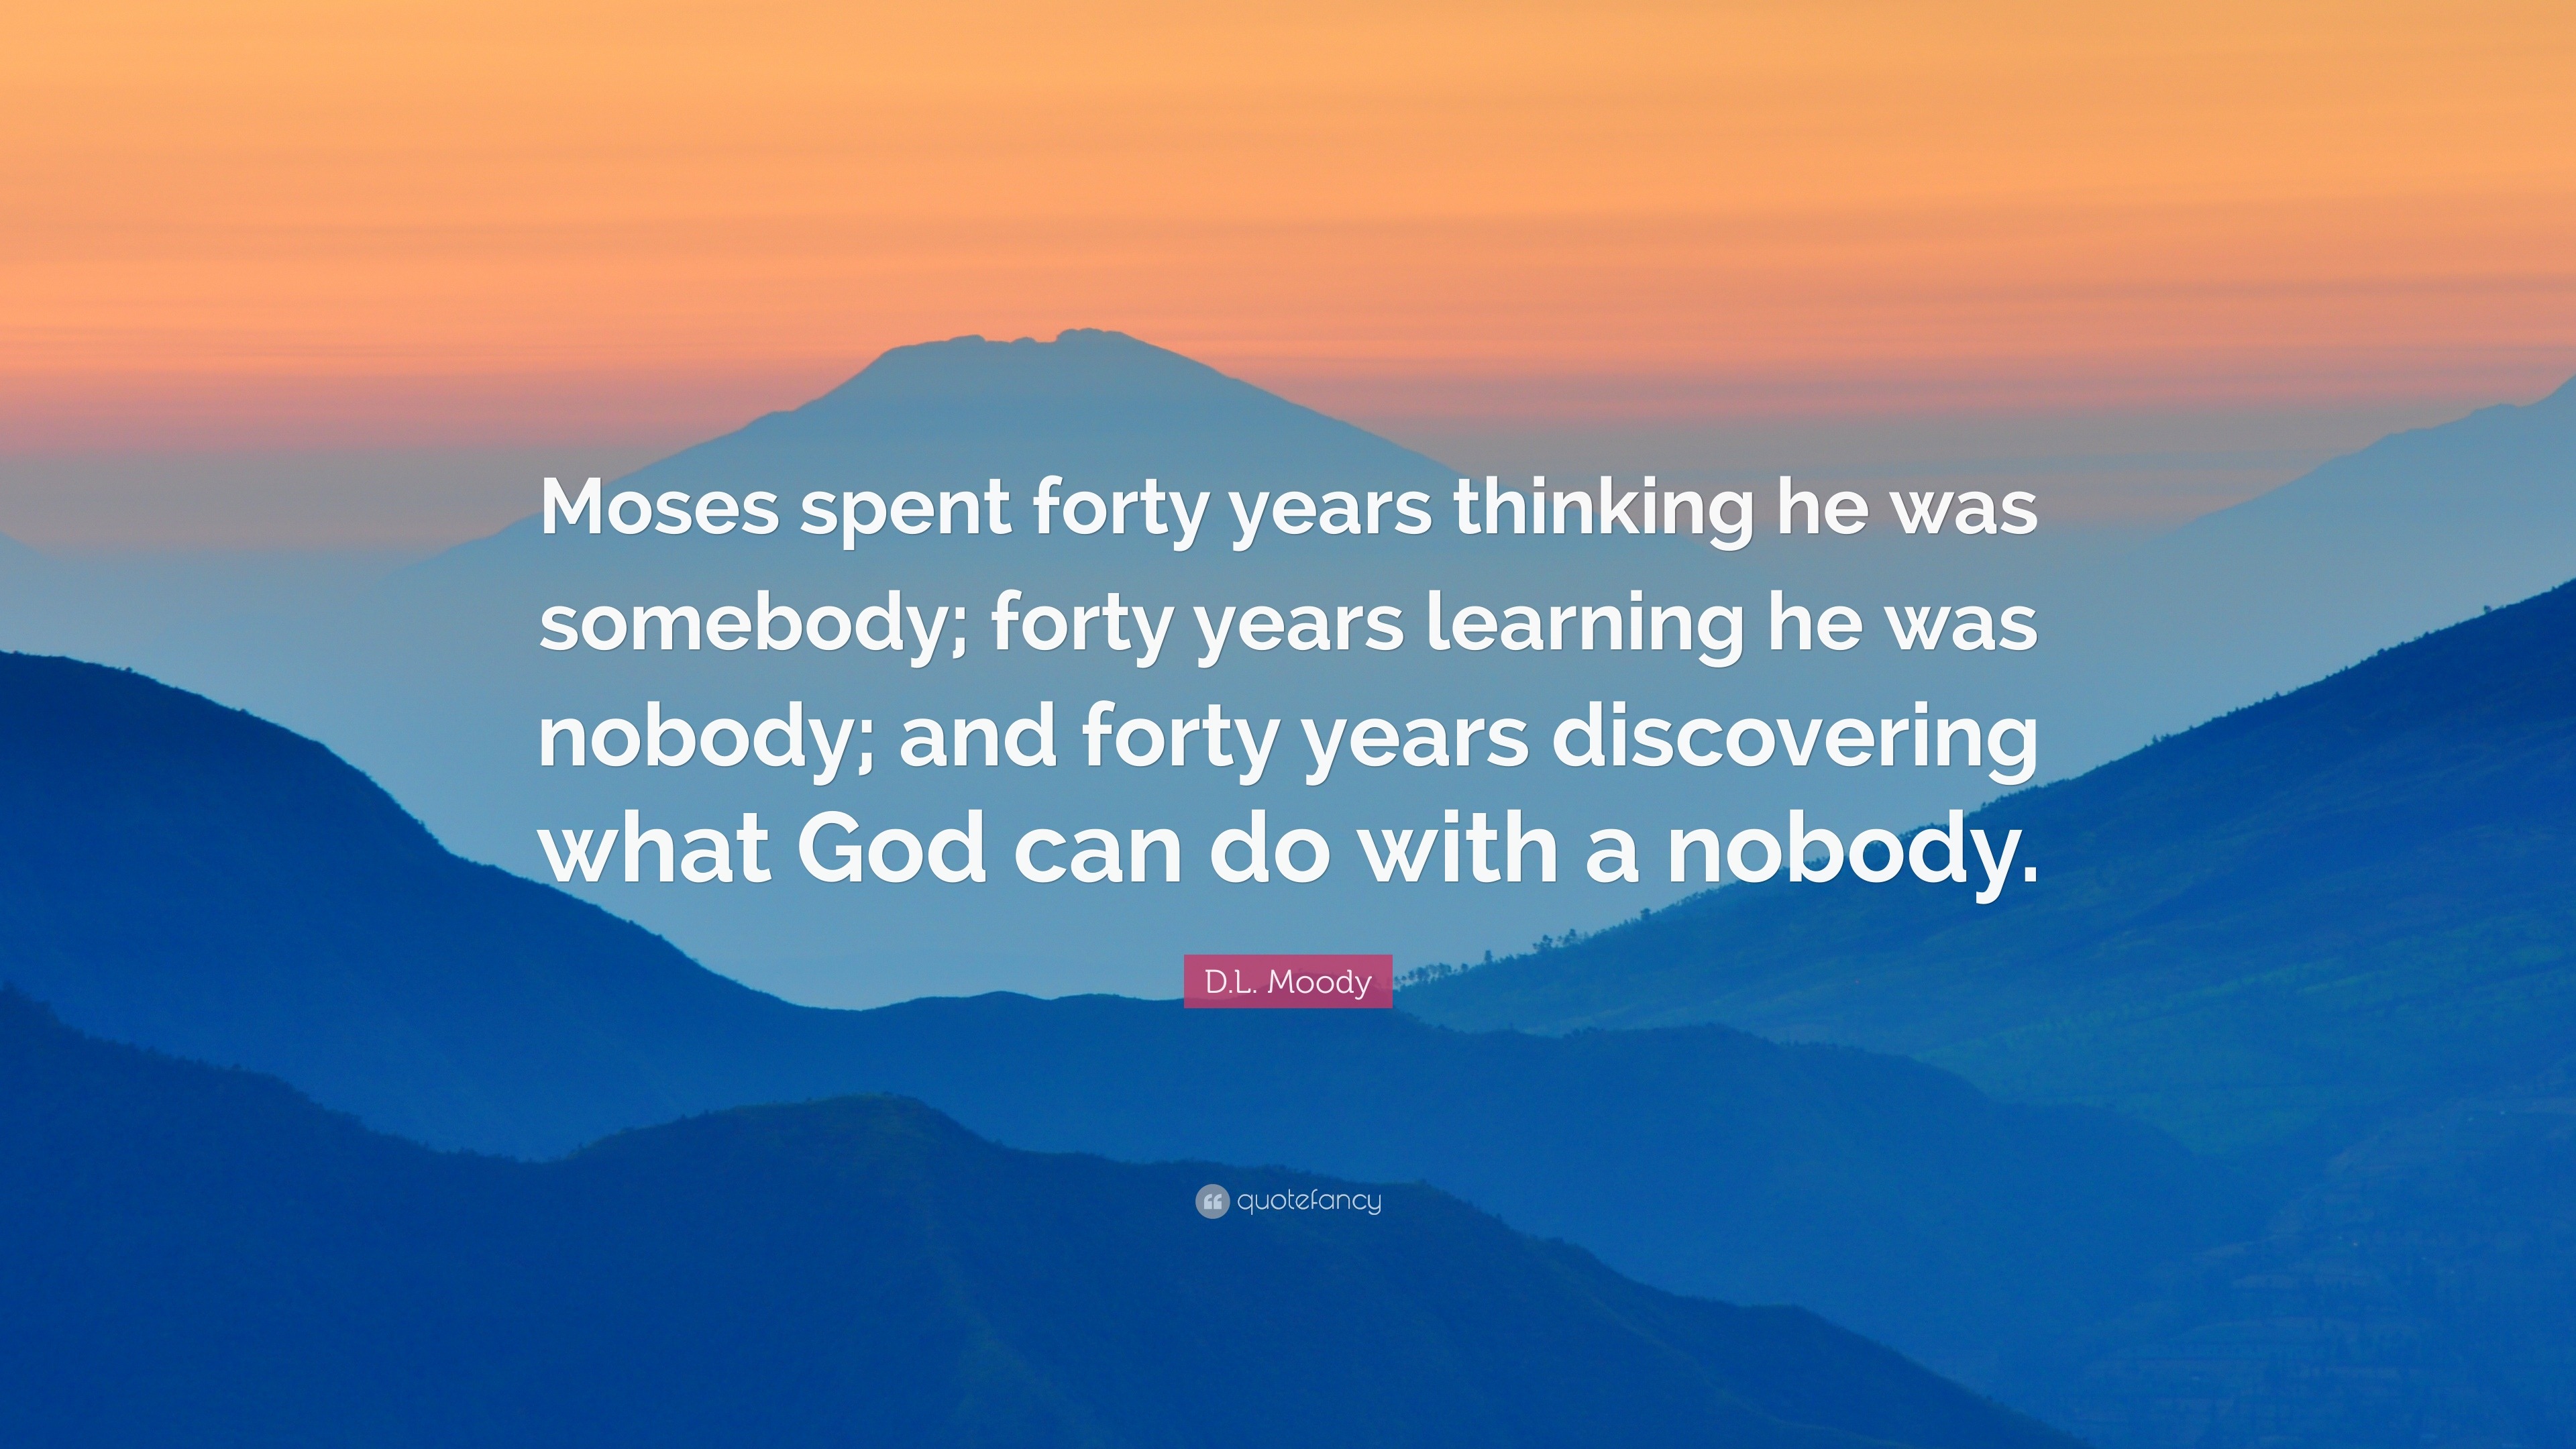 384076-D-L-Moody-Quote-Moses-spent-forty-years-thinking-he-was-somebody.jpg